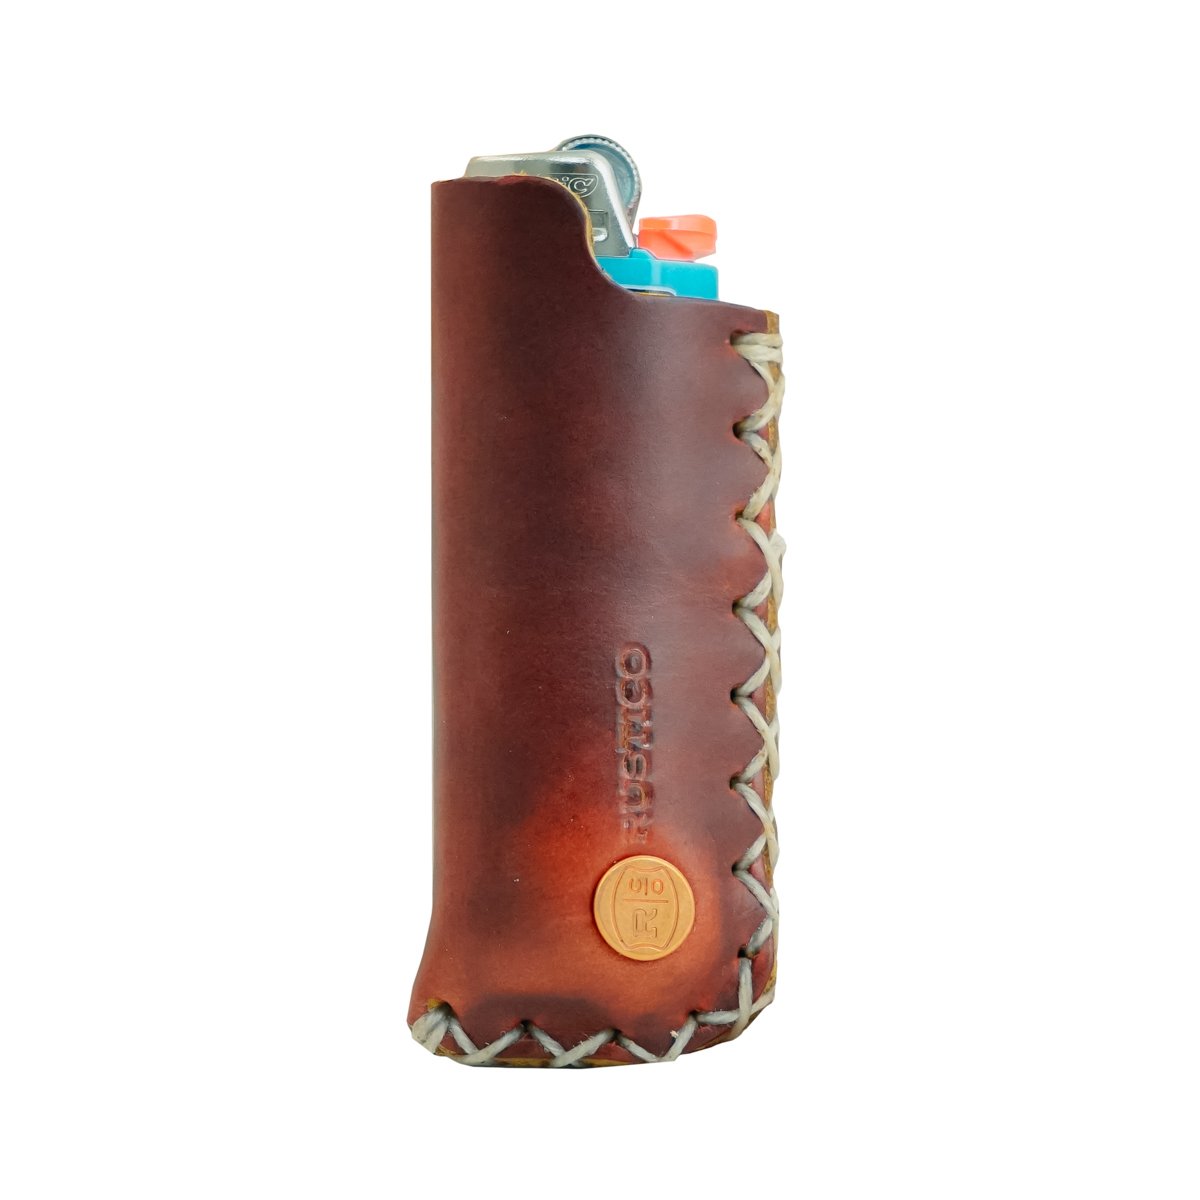 Rustico Ember Leather Lighter Sleeve in Black AC0171-0003